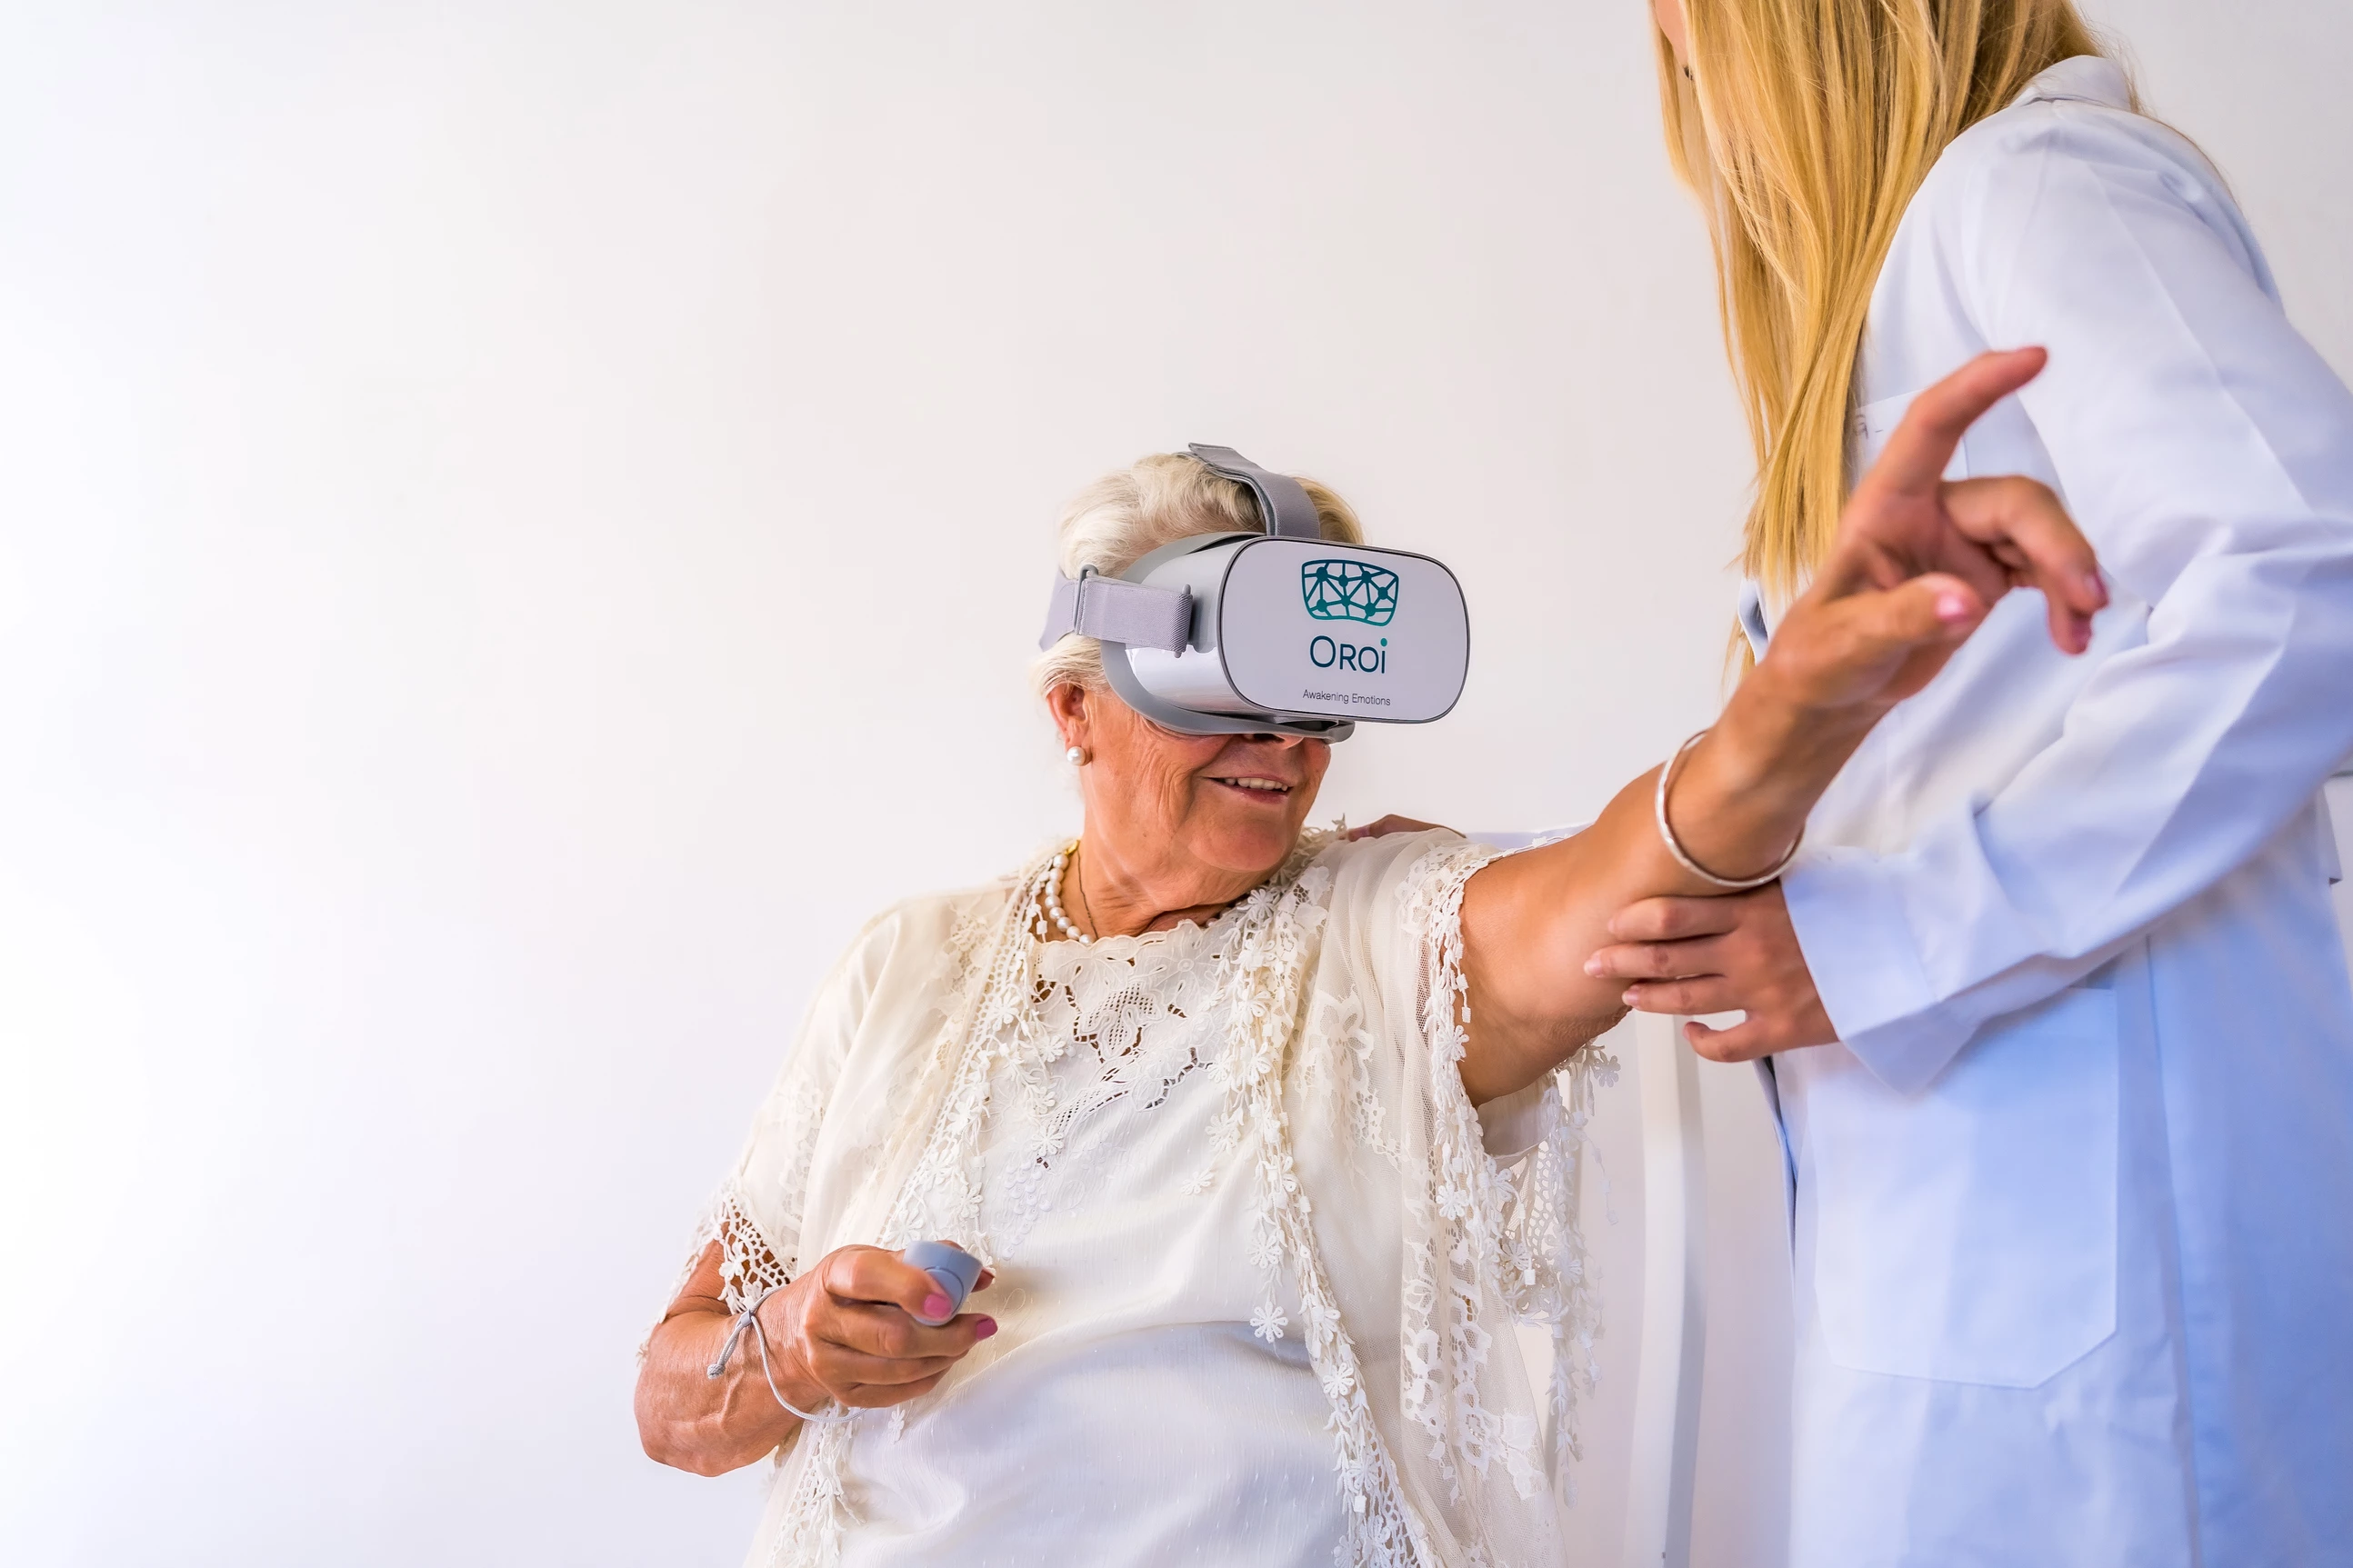 Its use started with computer games and is now an important part of the medicine and care sector- VR